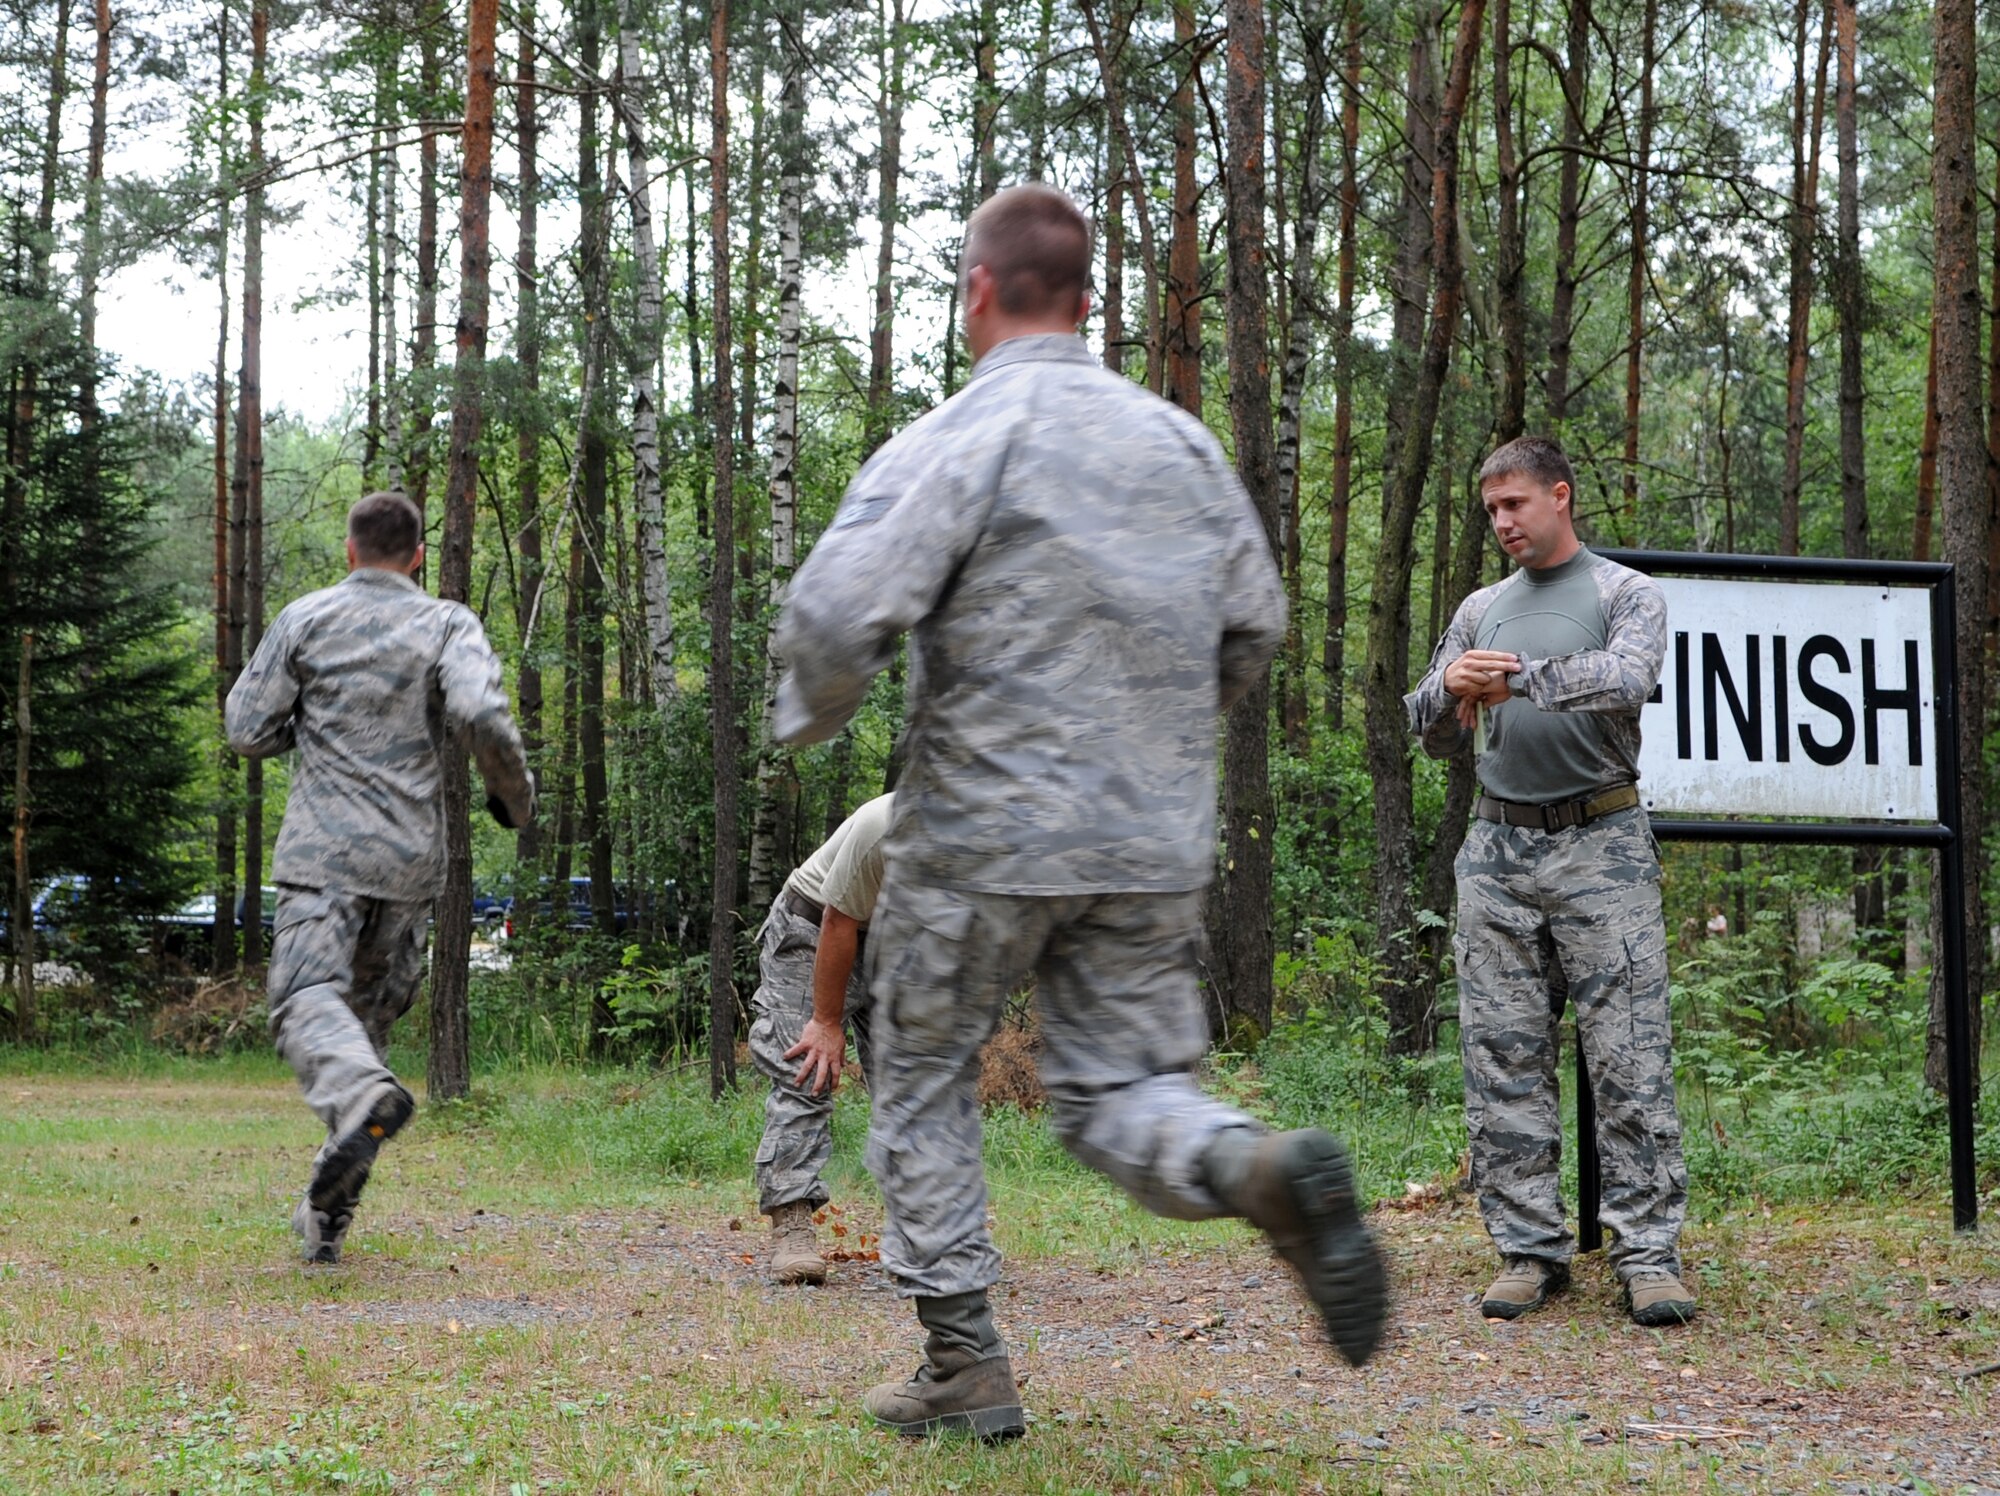 Airmen participants complete an obstacle course during Allied Strike 10, Grafenwoehr, Germany, July 23, 2010. Allied Strike is Europe's premier close air support (CAS) exercise, held annually to conduct robust, realistic CAS training that helps build partnership capacity among allied North Atlantic Treaty Organization nations and joint services while refining the latest operational CAS tactics. For more ALLIED STRIKE information go to www.usafe.af.mil/alliedstrike.asp. (U.S. Air Force photo by Senior Airman Caleb Pierce)